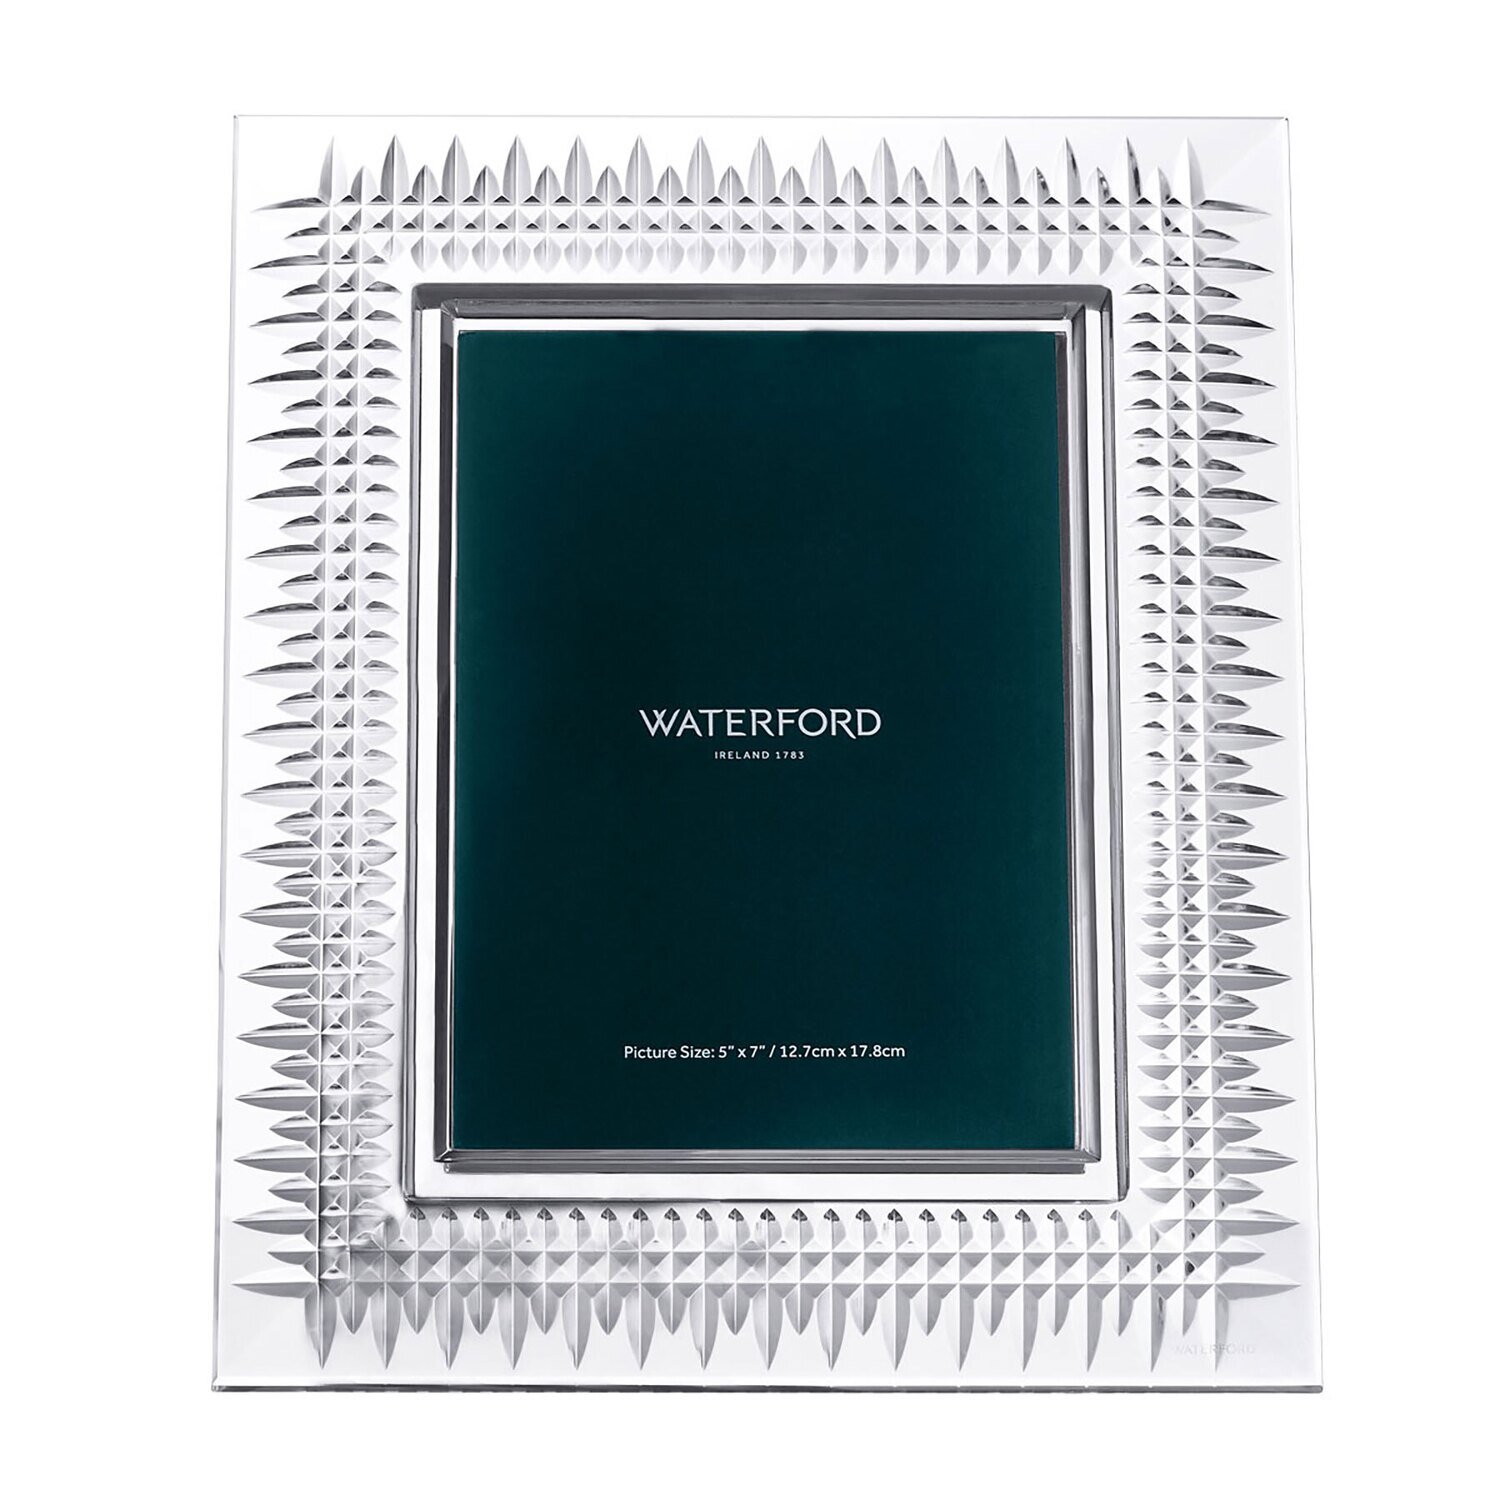 Waterford Lismore Diamond Picture Frame 5 x 7 Inch 1065337